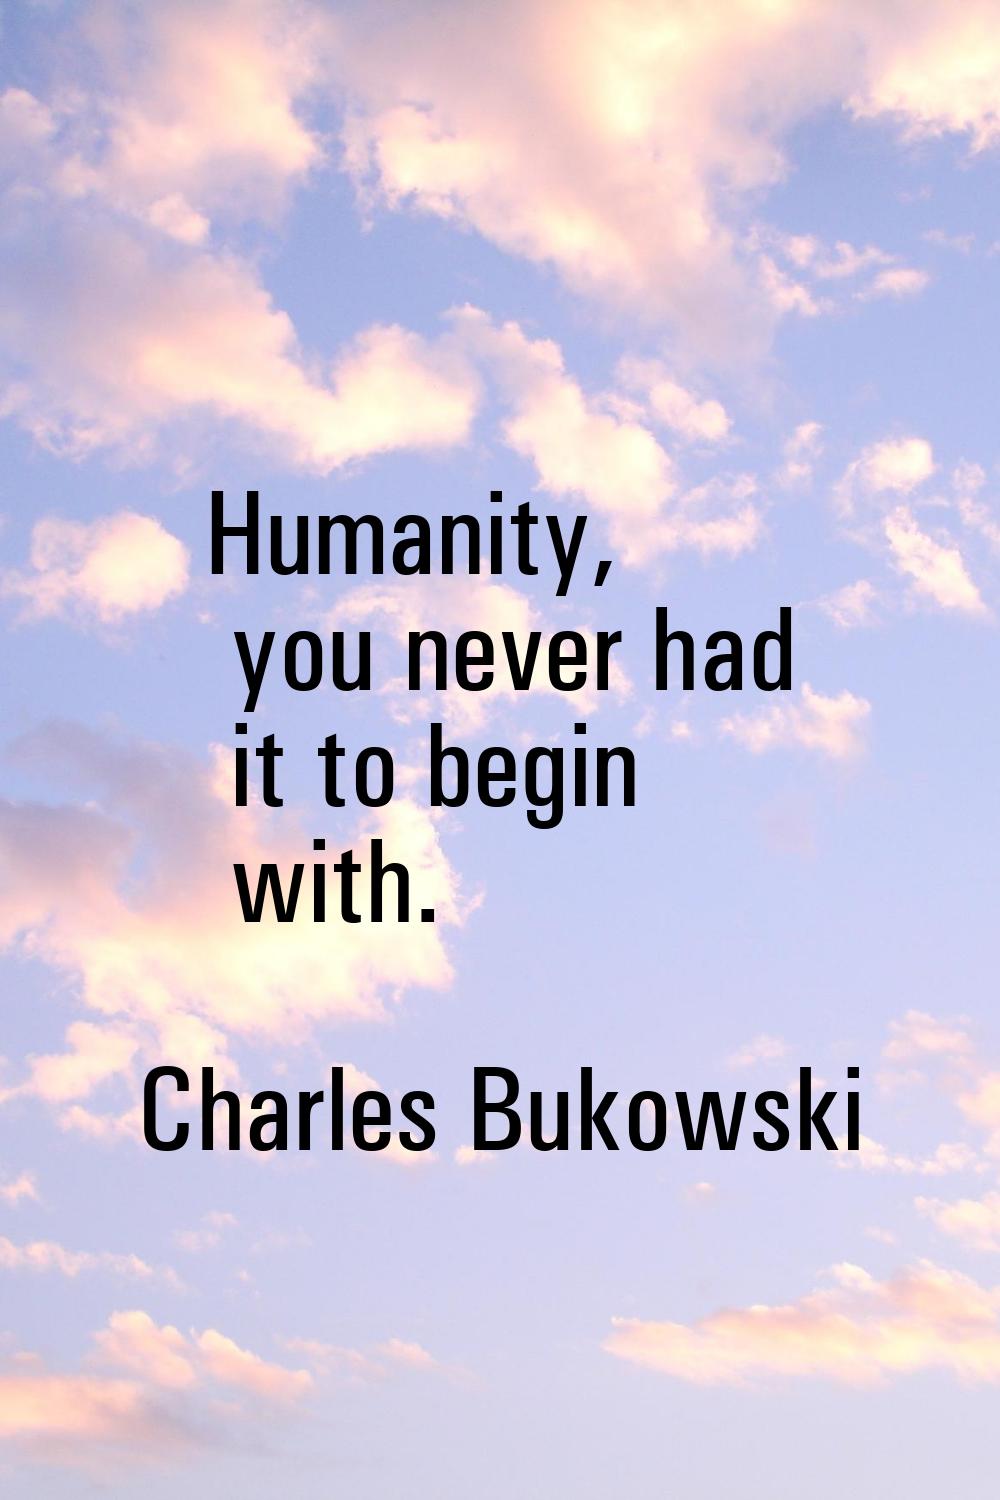 Humanity, you never had it to begin with.